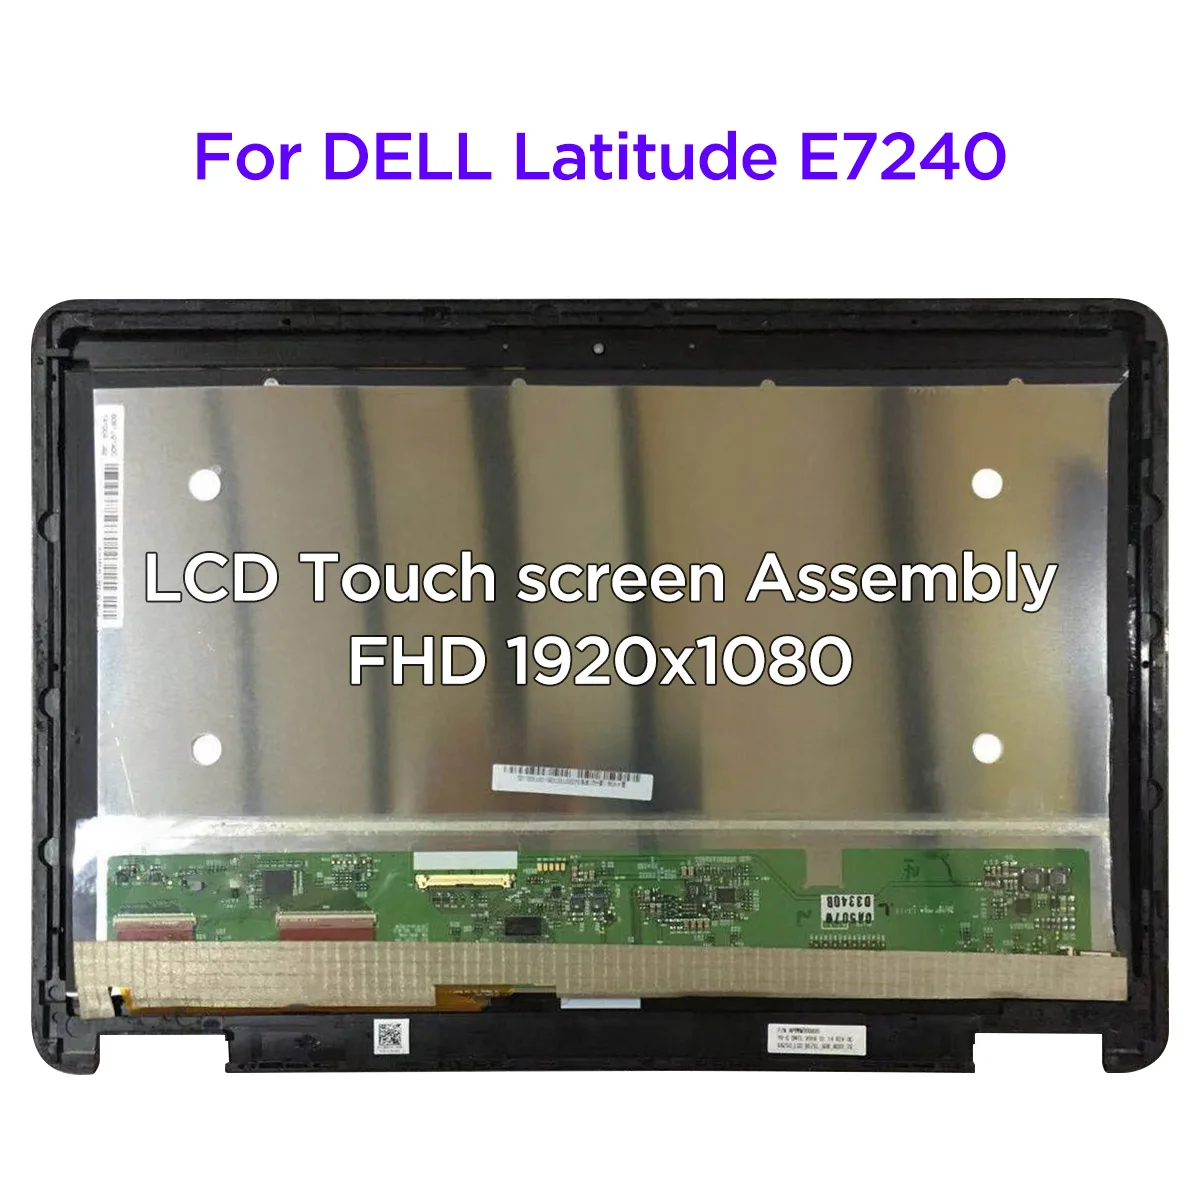 

Original 12.5" LCD Screen Touch Digitizer Assembly with Frame for DELL Latitude E7240 LP125WF1-SPA4 PY6P2 FHD 1920x1080 Display